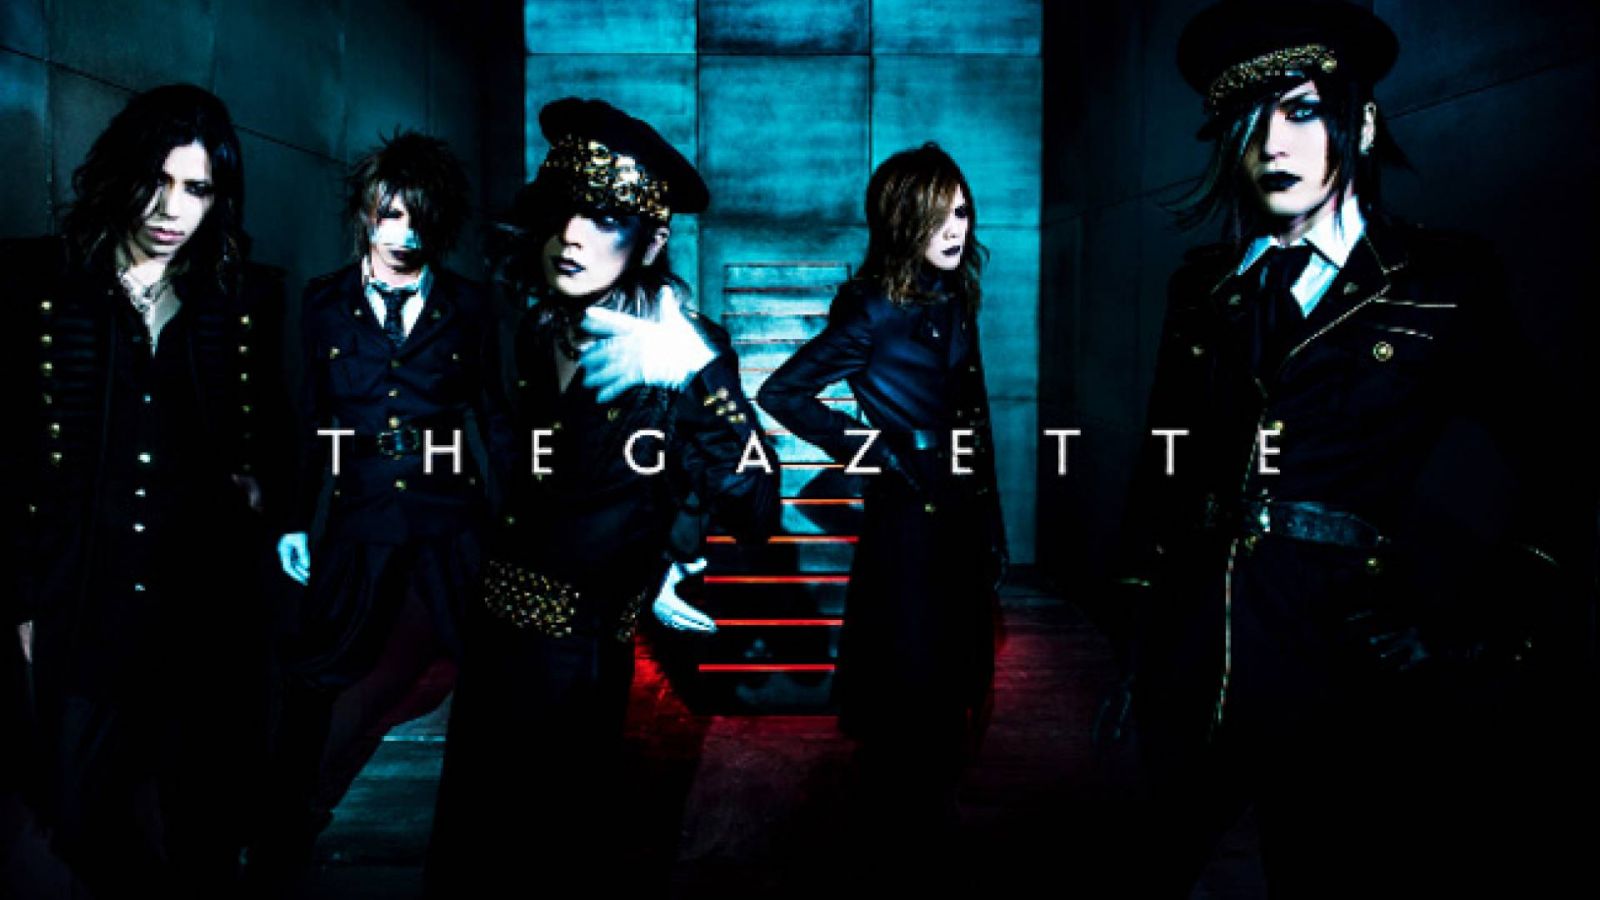 New Album from the GazettE © 2015 PS COMPANY. Provided by JPU Records.